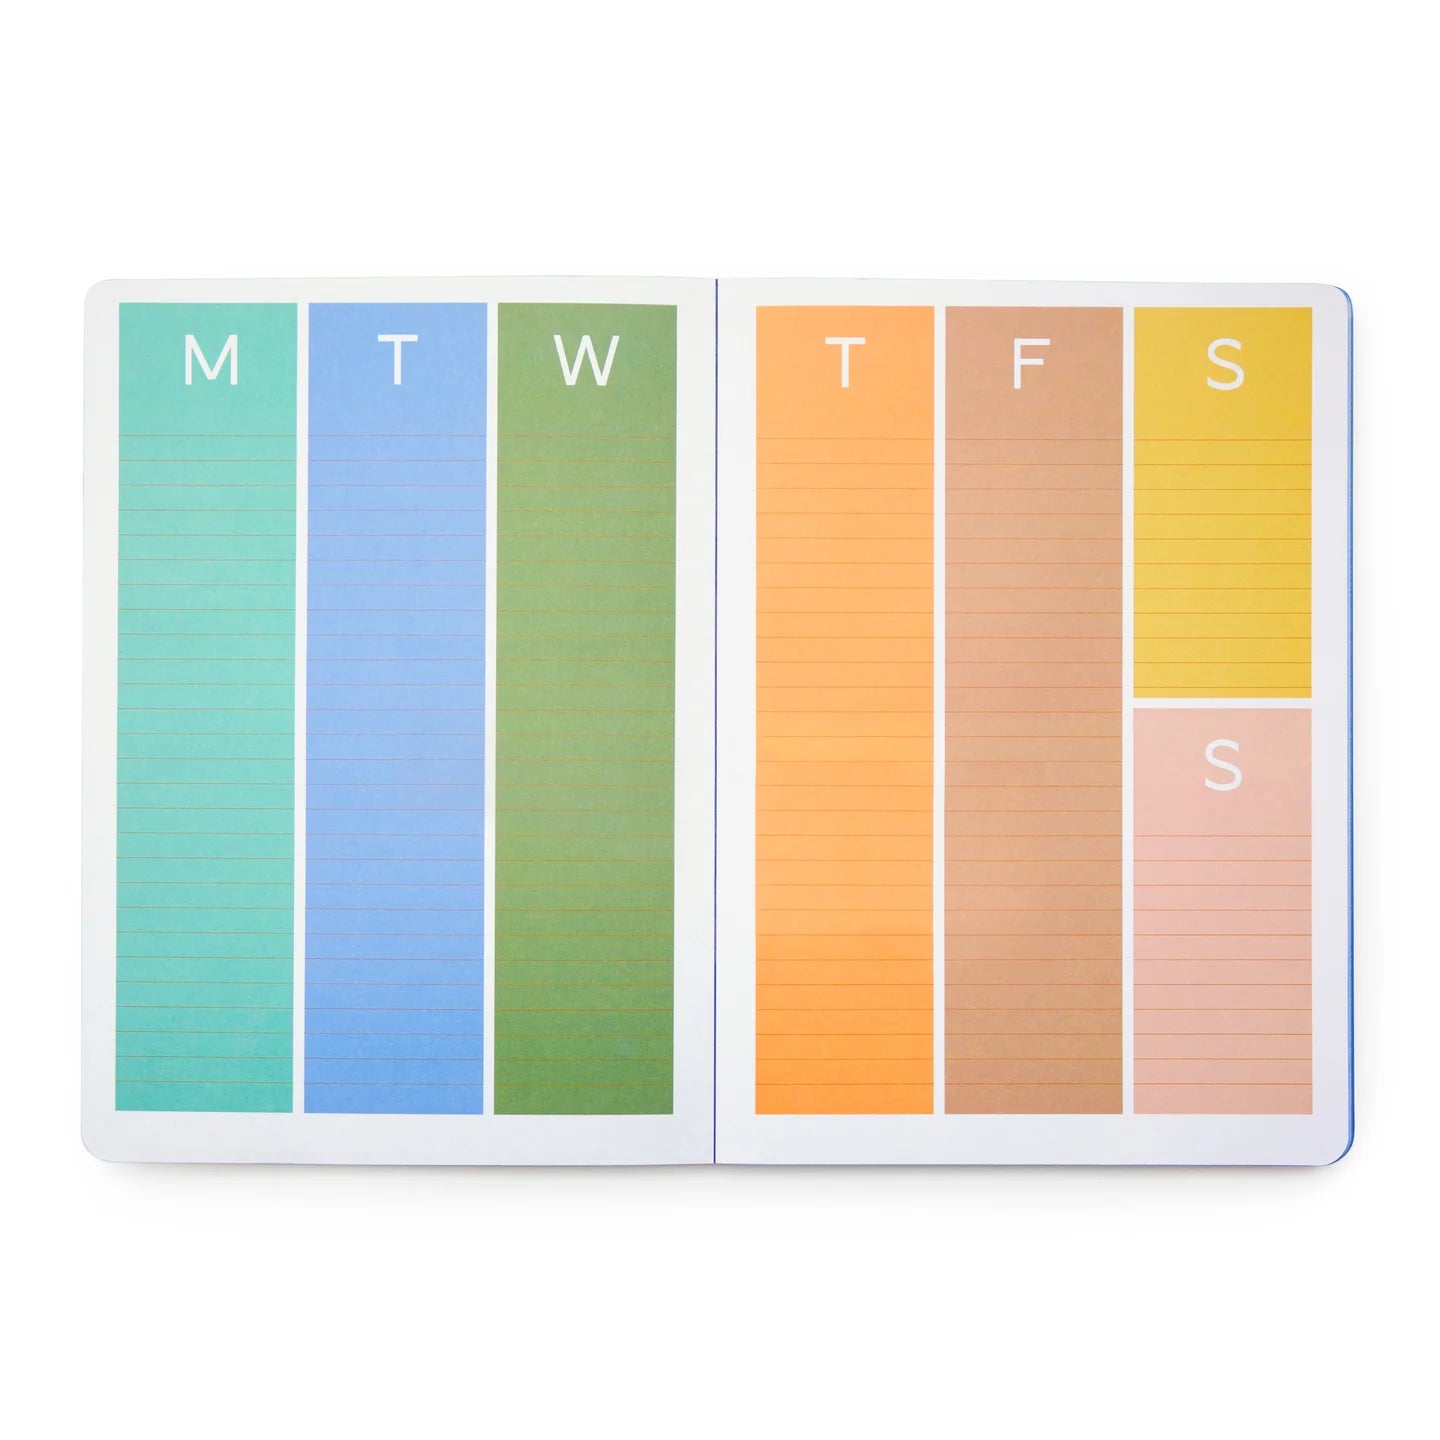 Fab Gifts | Kikkerland Undated Weekly Planner by Weirs of Baggot Street